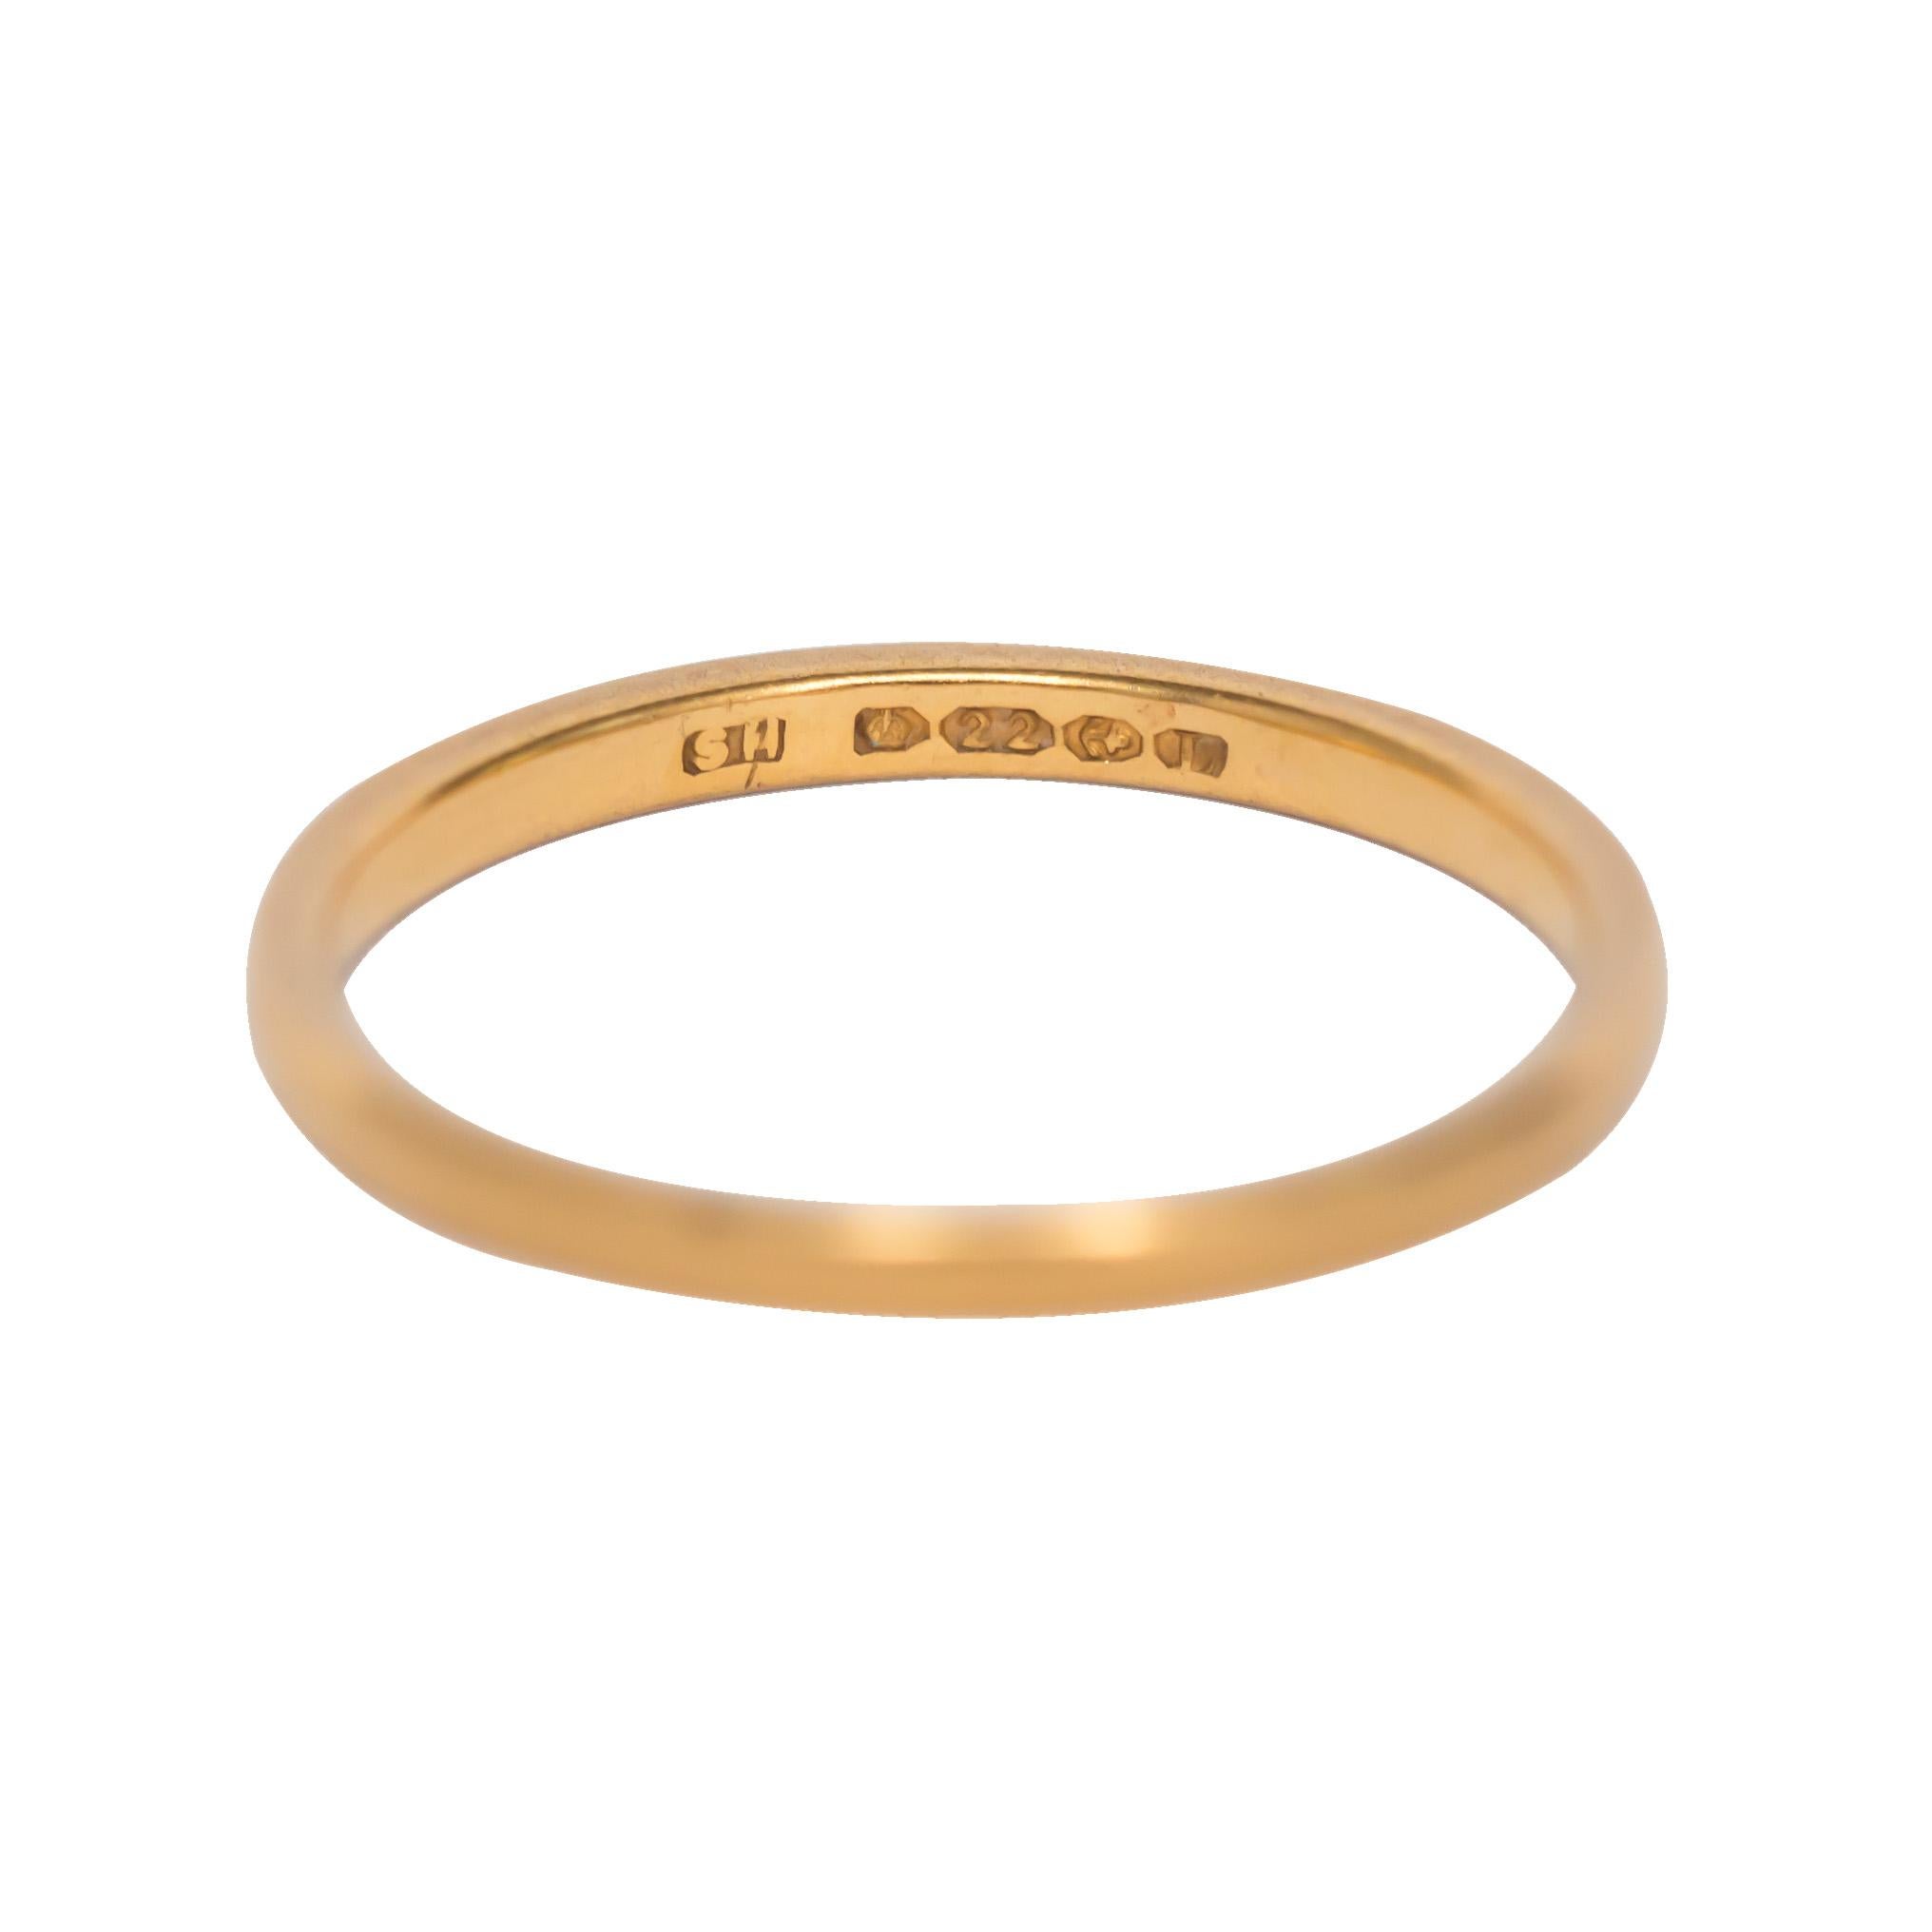 Ring Size: 6
Metal Type: 22 karat Yellow Gold 
Weight: 1.9 grams

Finger to Top of Stone Measurement: 1.22mm
Width: 1.81

Hallmarks on the inside dates to 1860 and to Birmingham